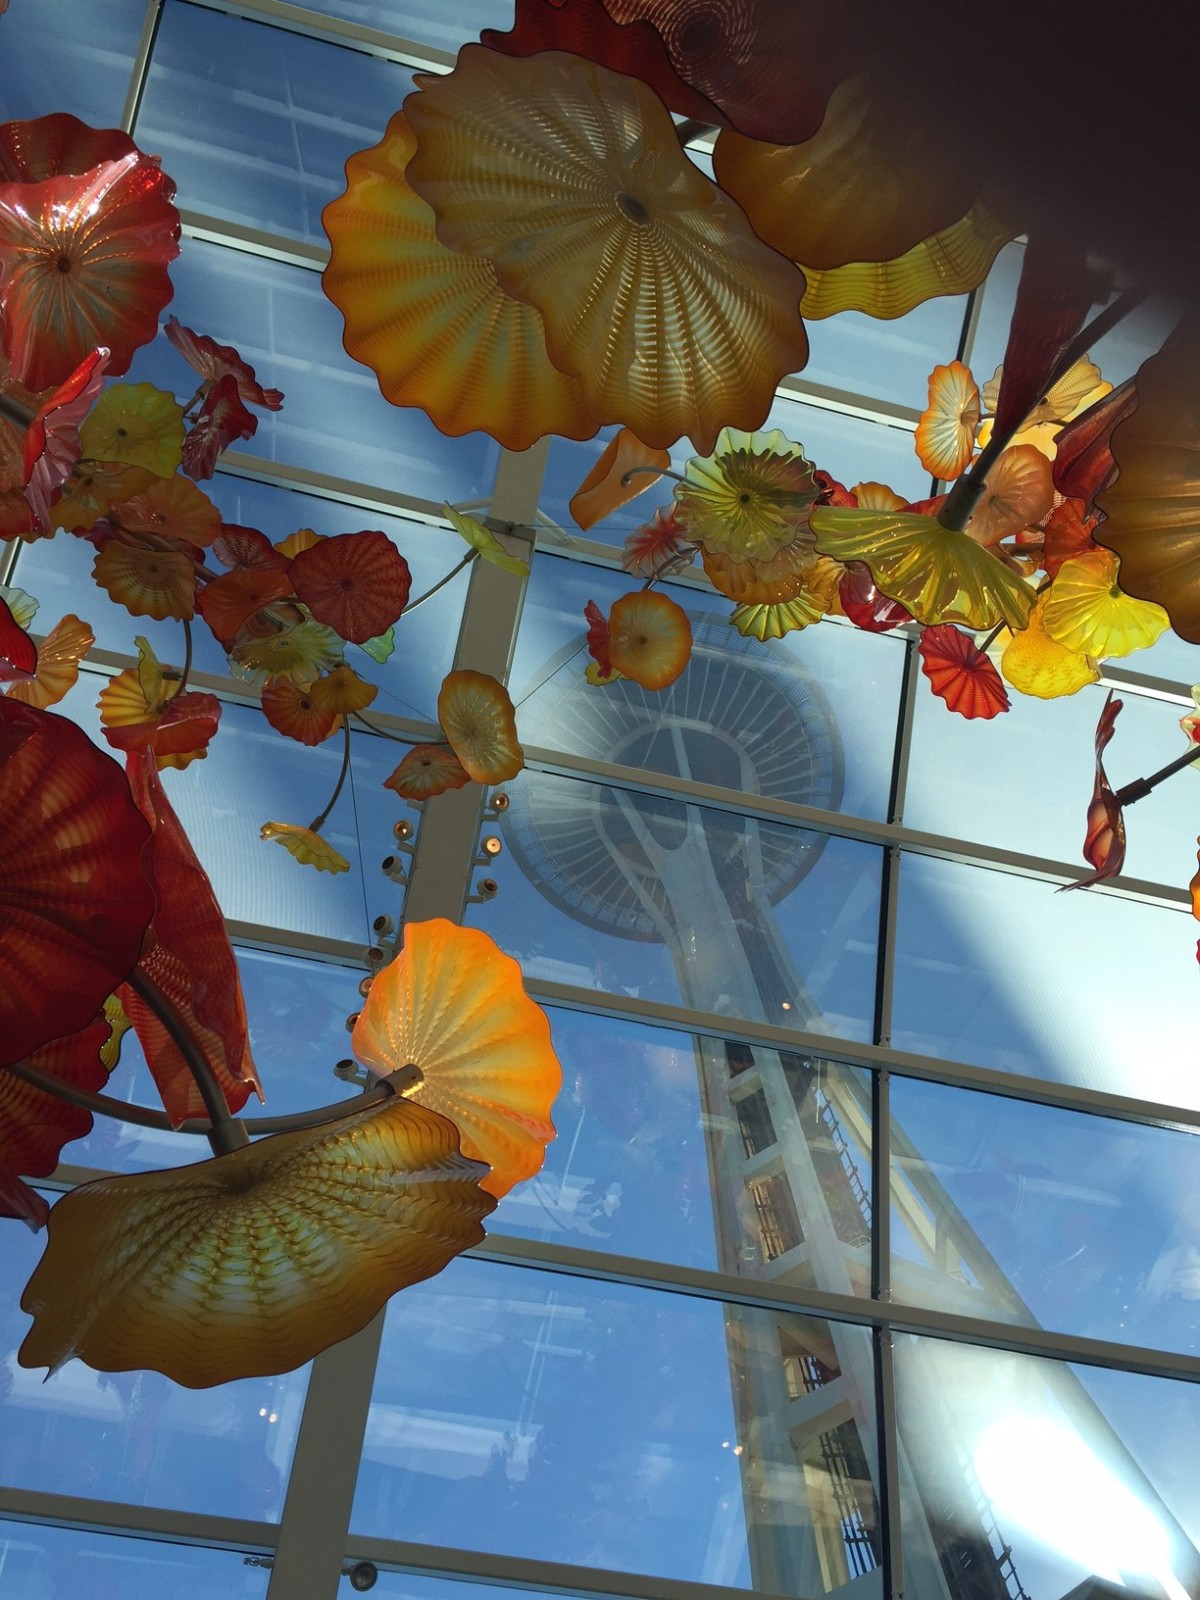 Picture of the Day – Space Needle from Chihuly Garden & Glass exhibit